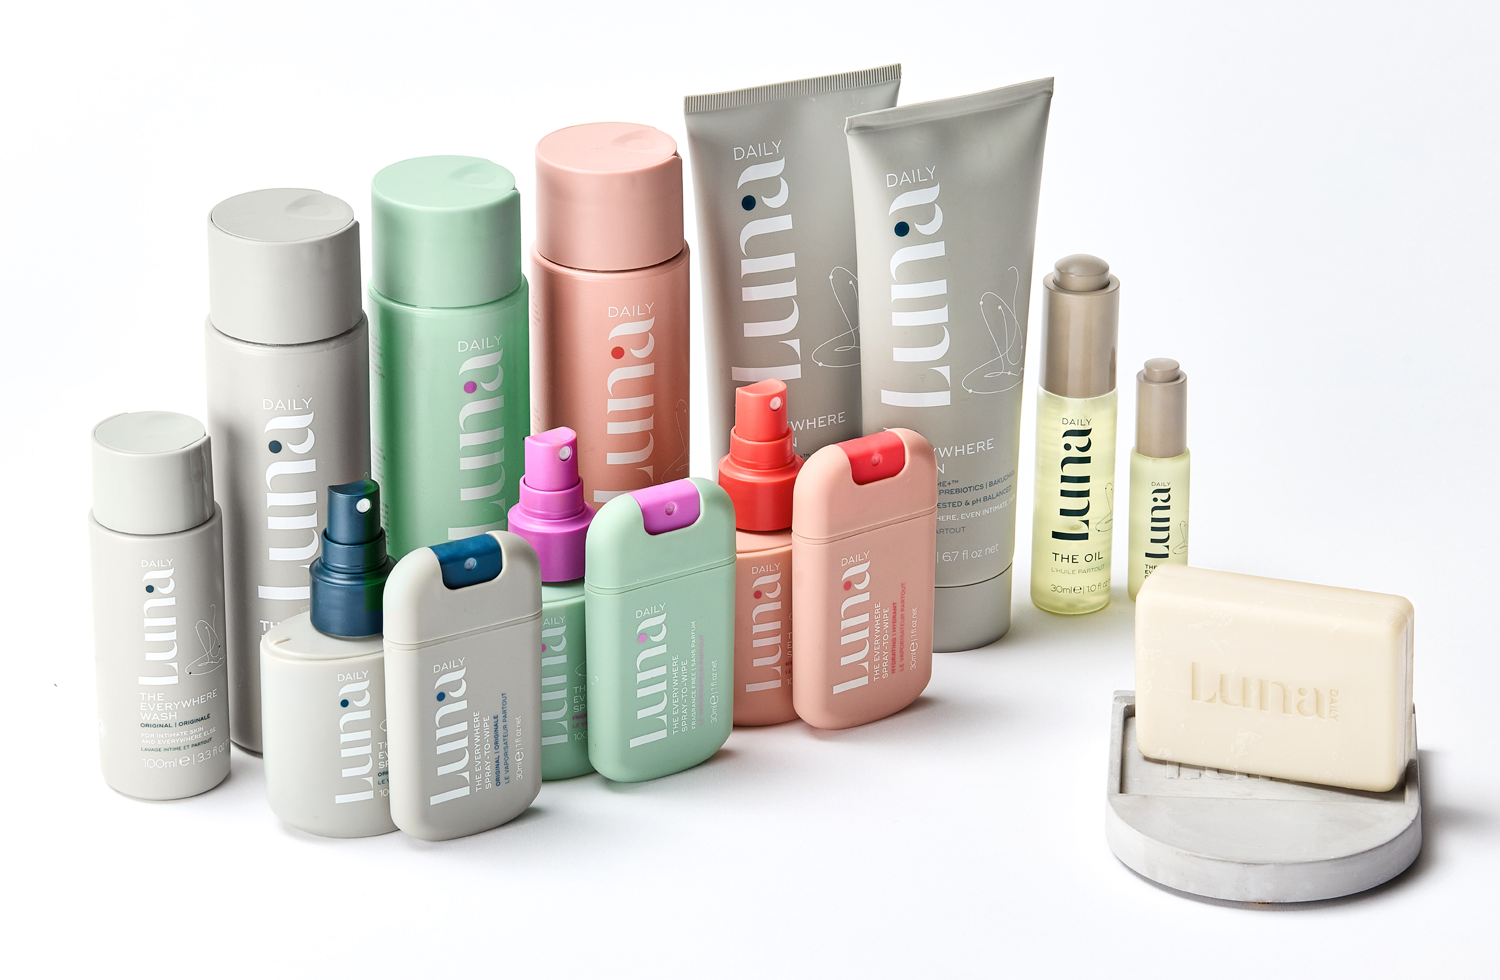 Luna Daily  Microbiome balancing body care for all skin.